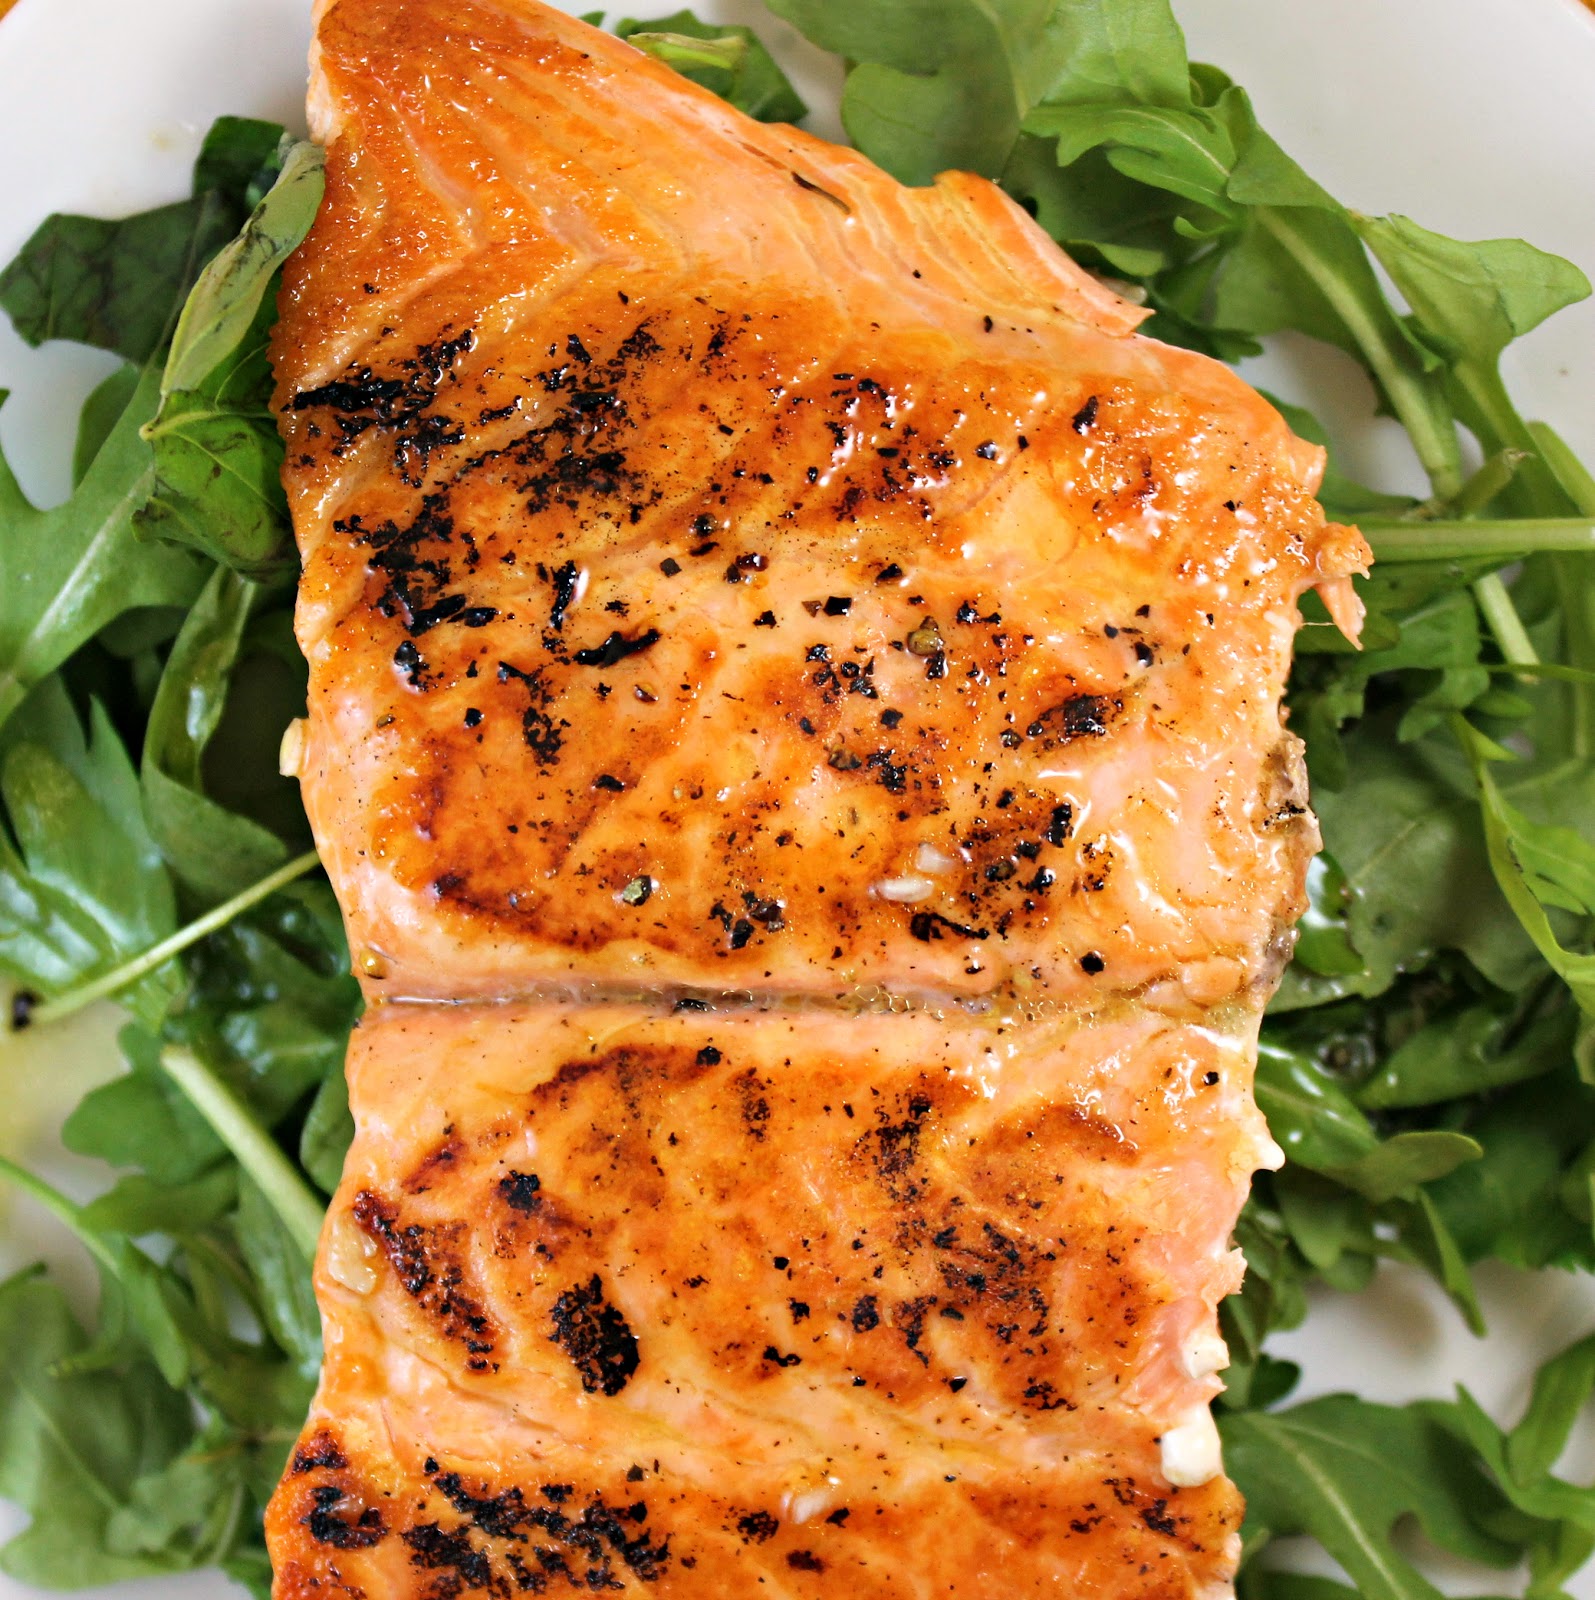 Crispy Salmon with Herb Salad | I Can Cook That